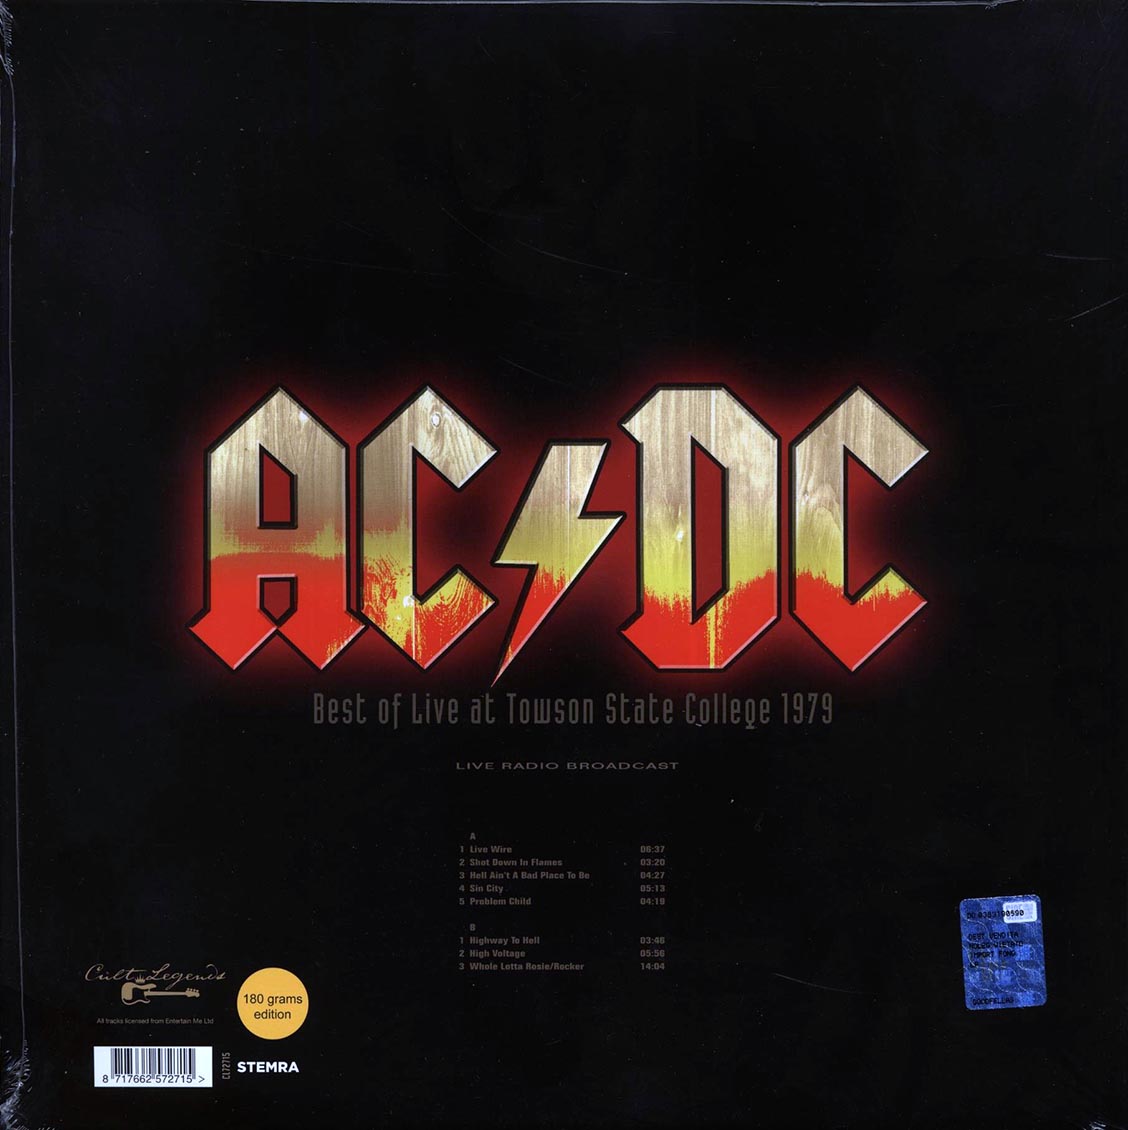 AC/DC - Best Of Live At Towson State College 1979, Maryland, October 16th - Vinyl LP, LP